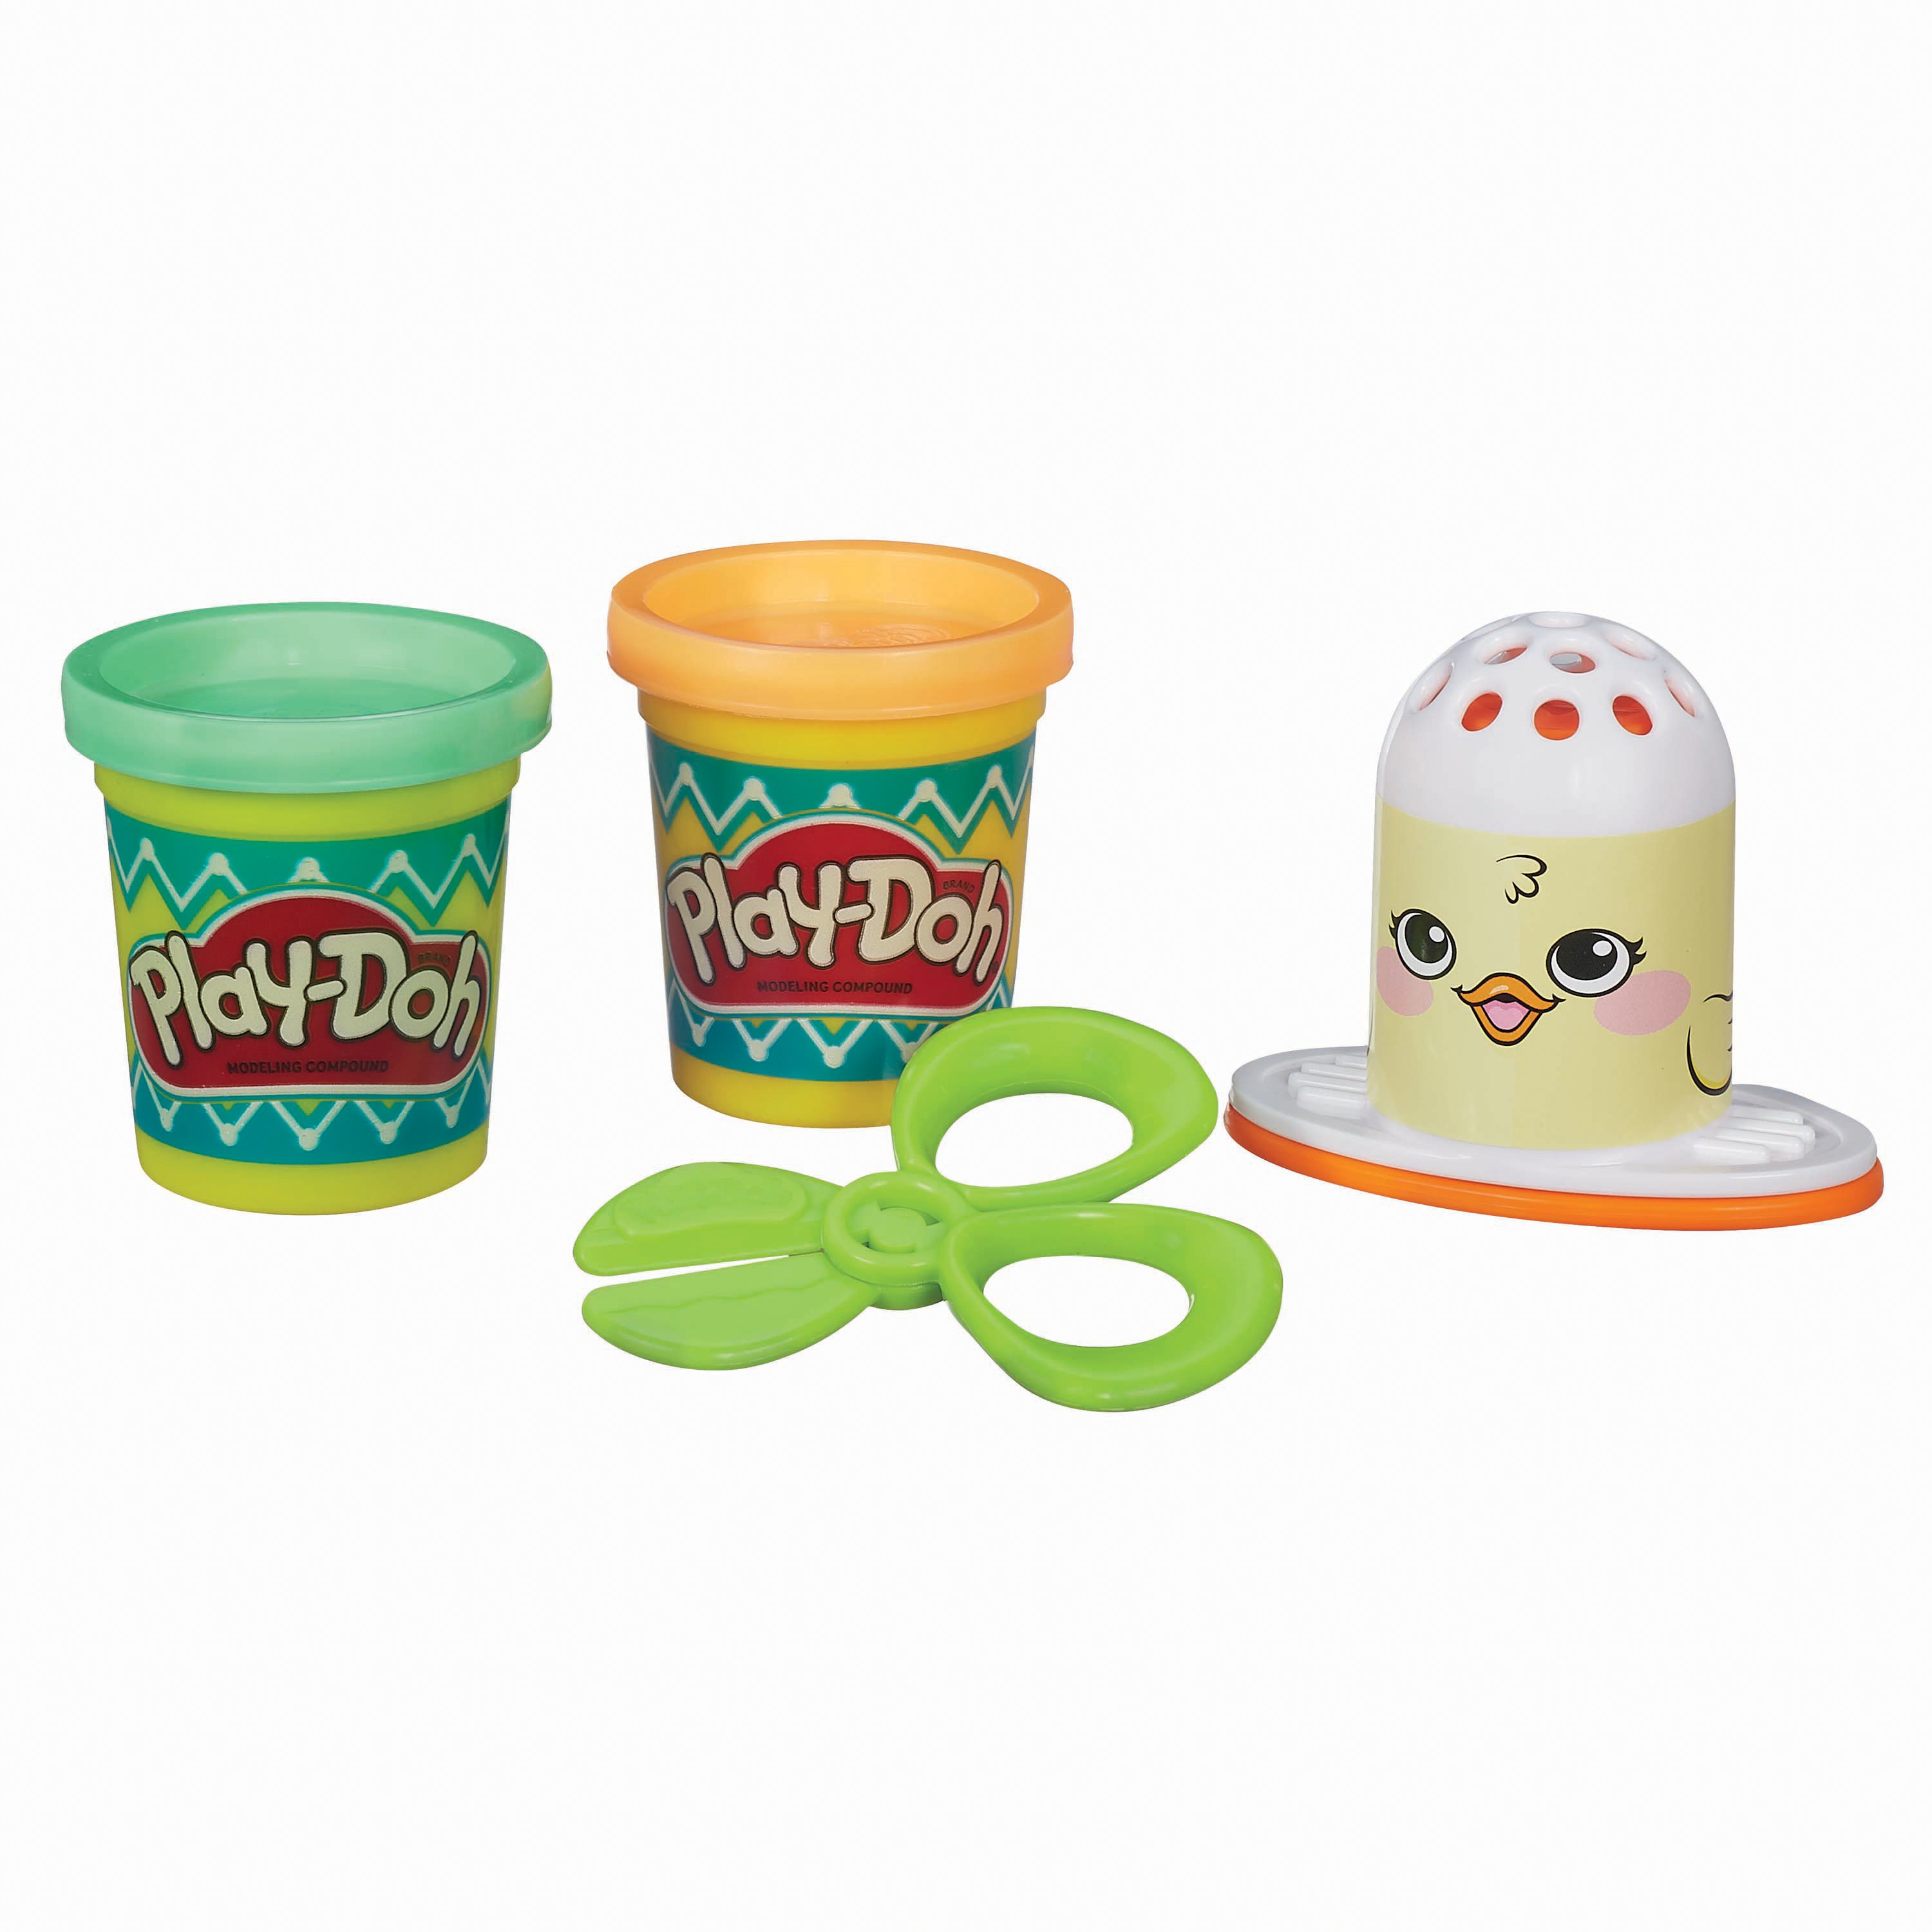 Play-Doh Classic Colors - Shop Clay at H-E-B